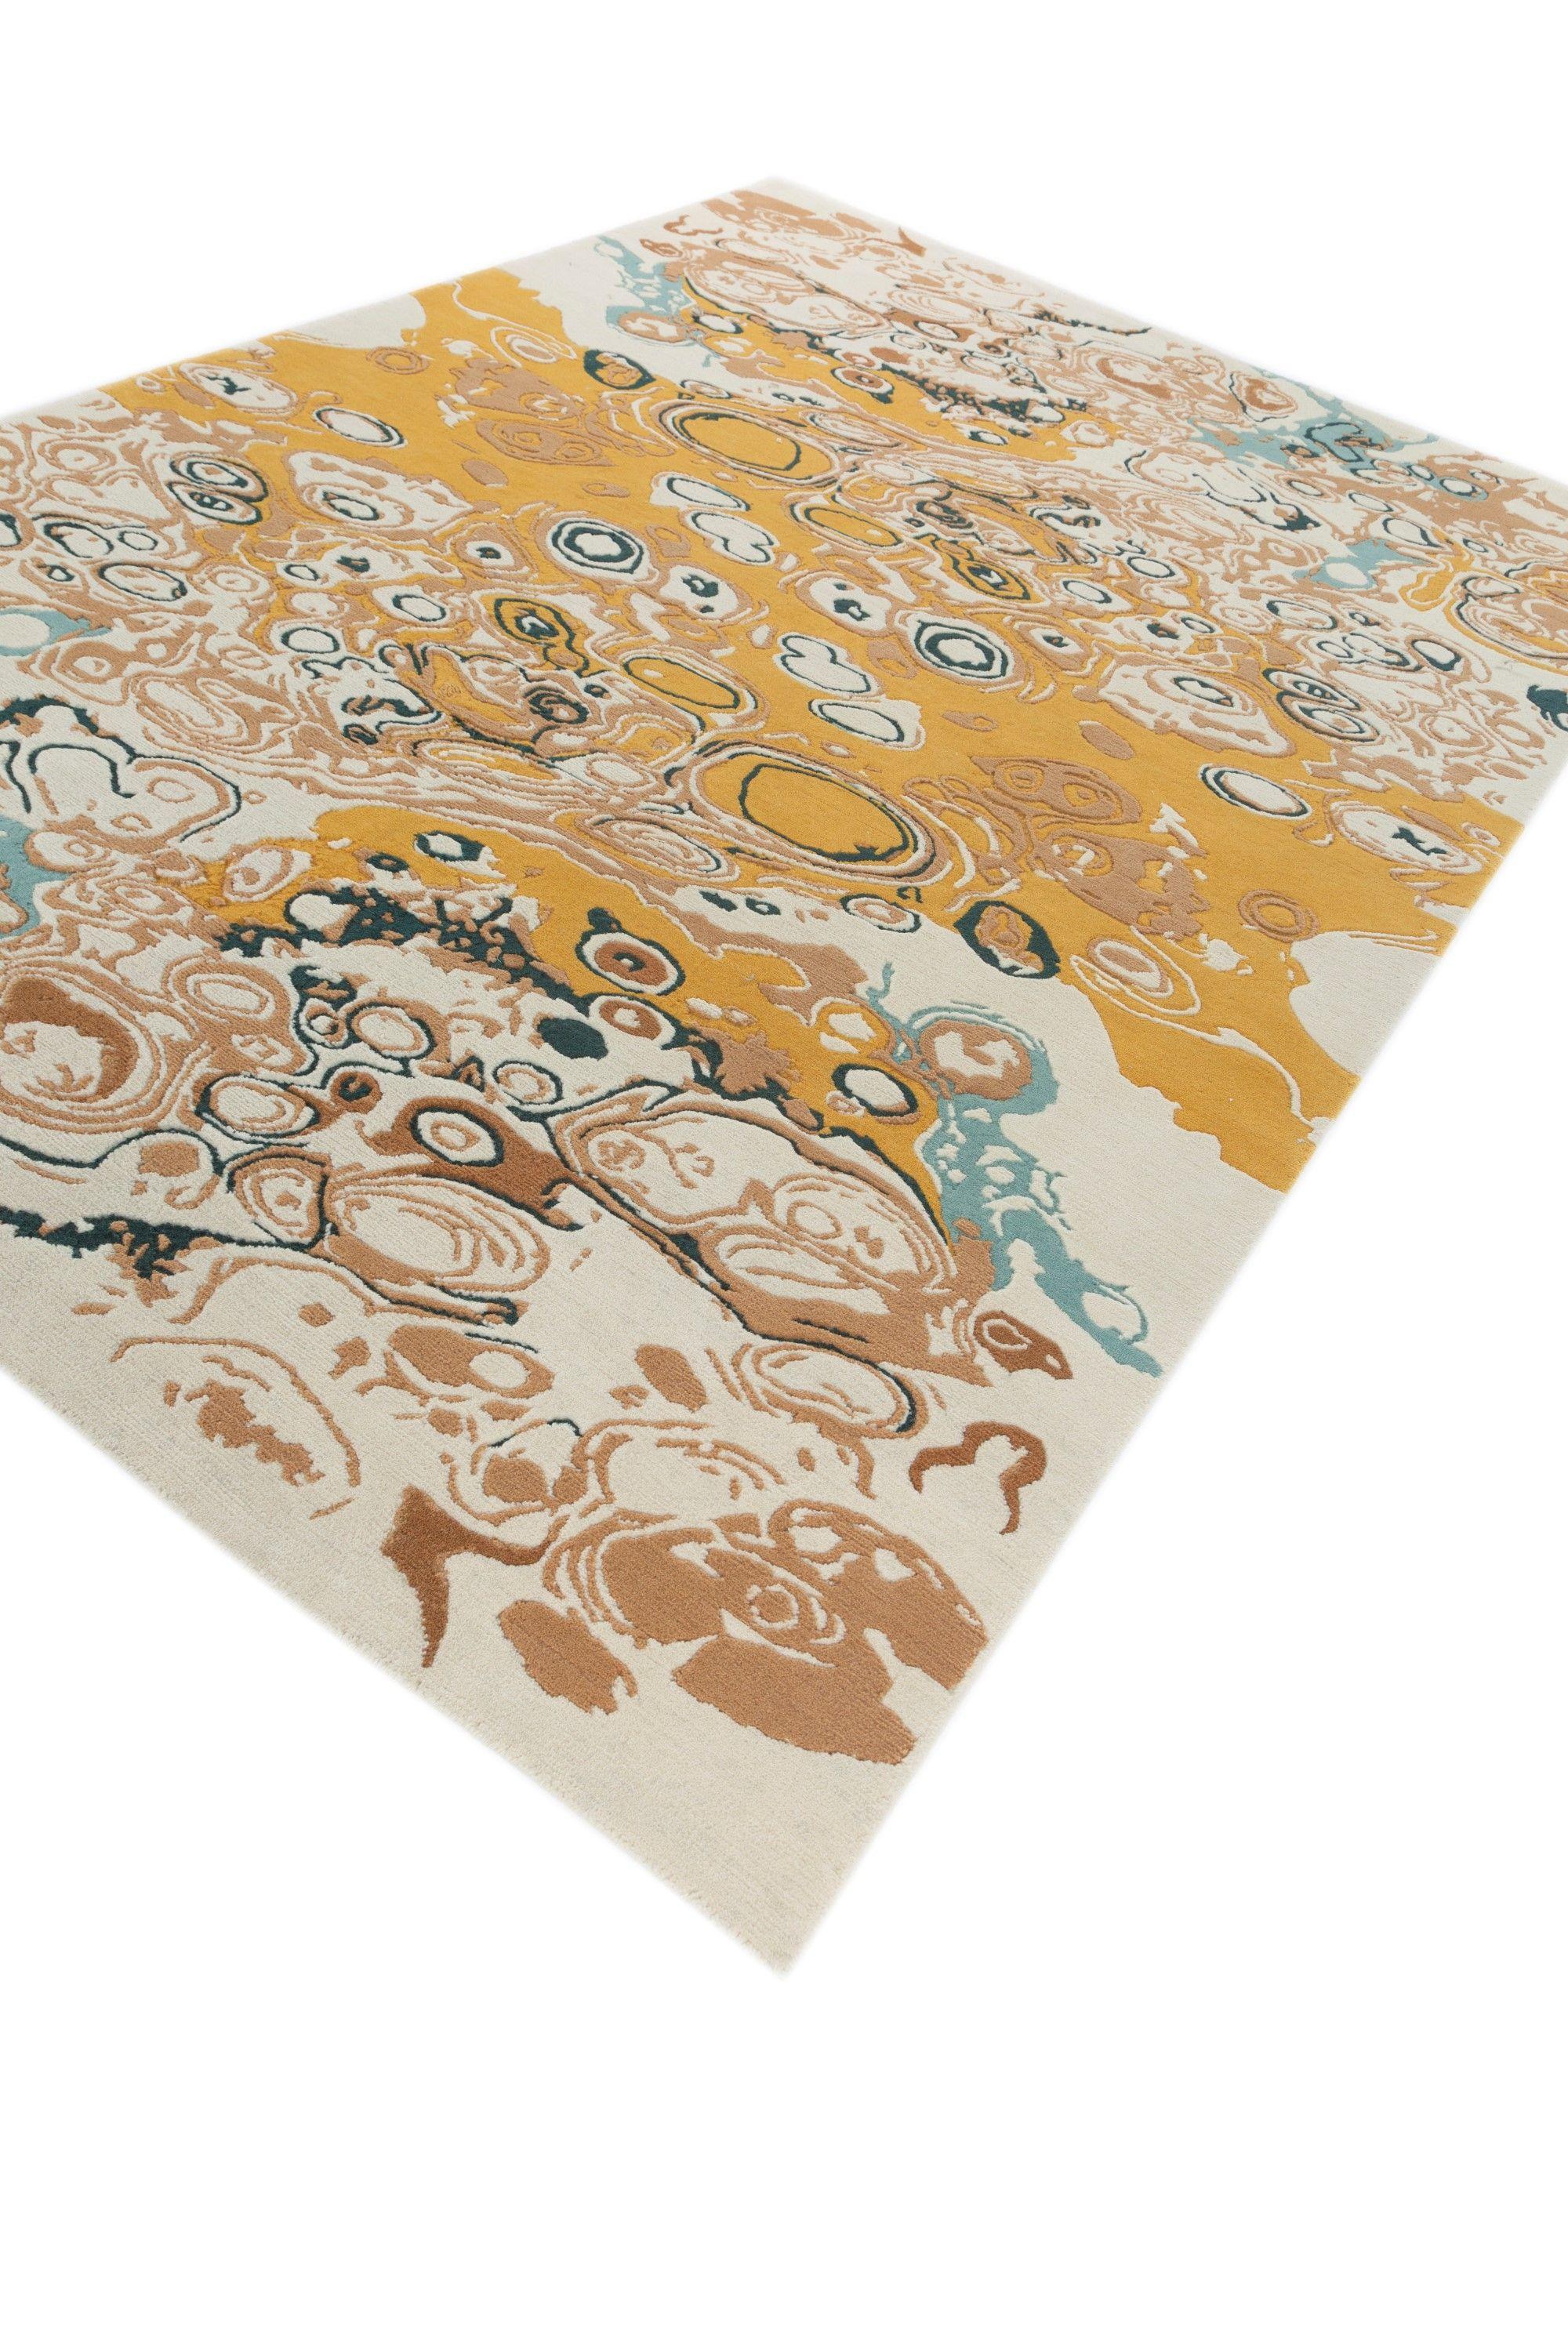 Modern Earthly Serenade Snow White & Indian Tan 180X270 cm Handknotted Rug For Sale